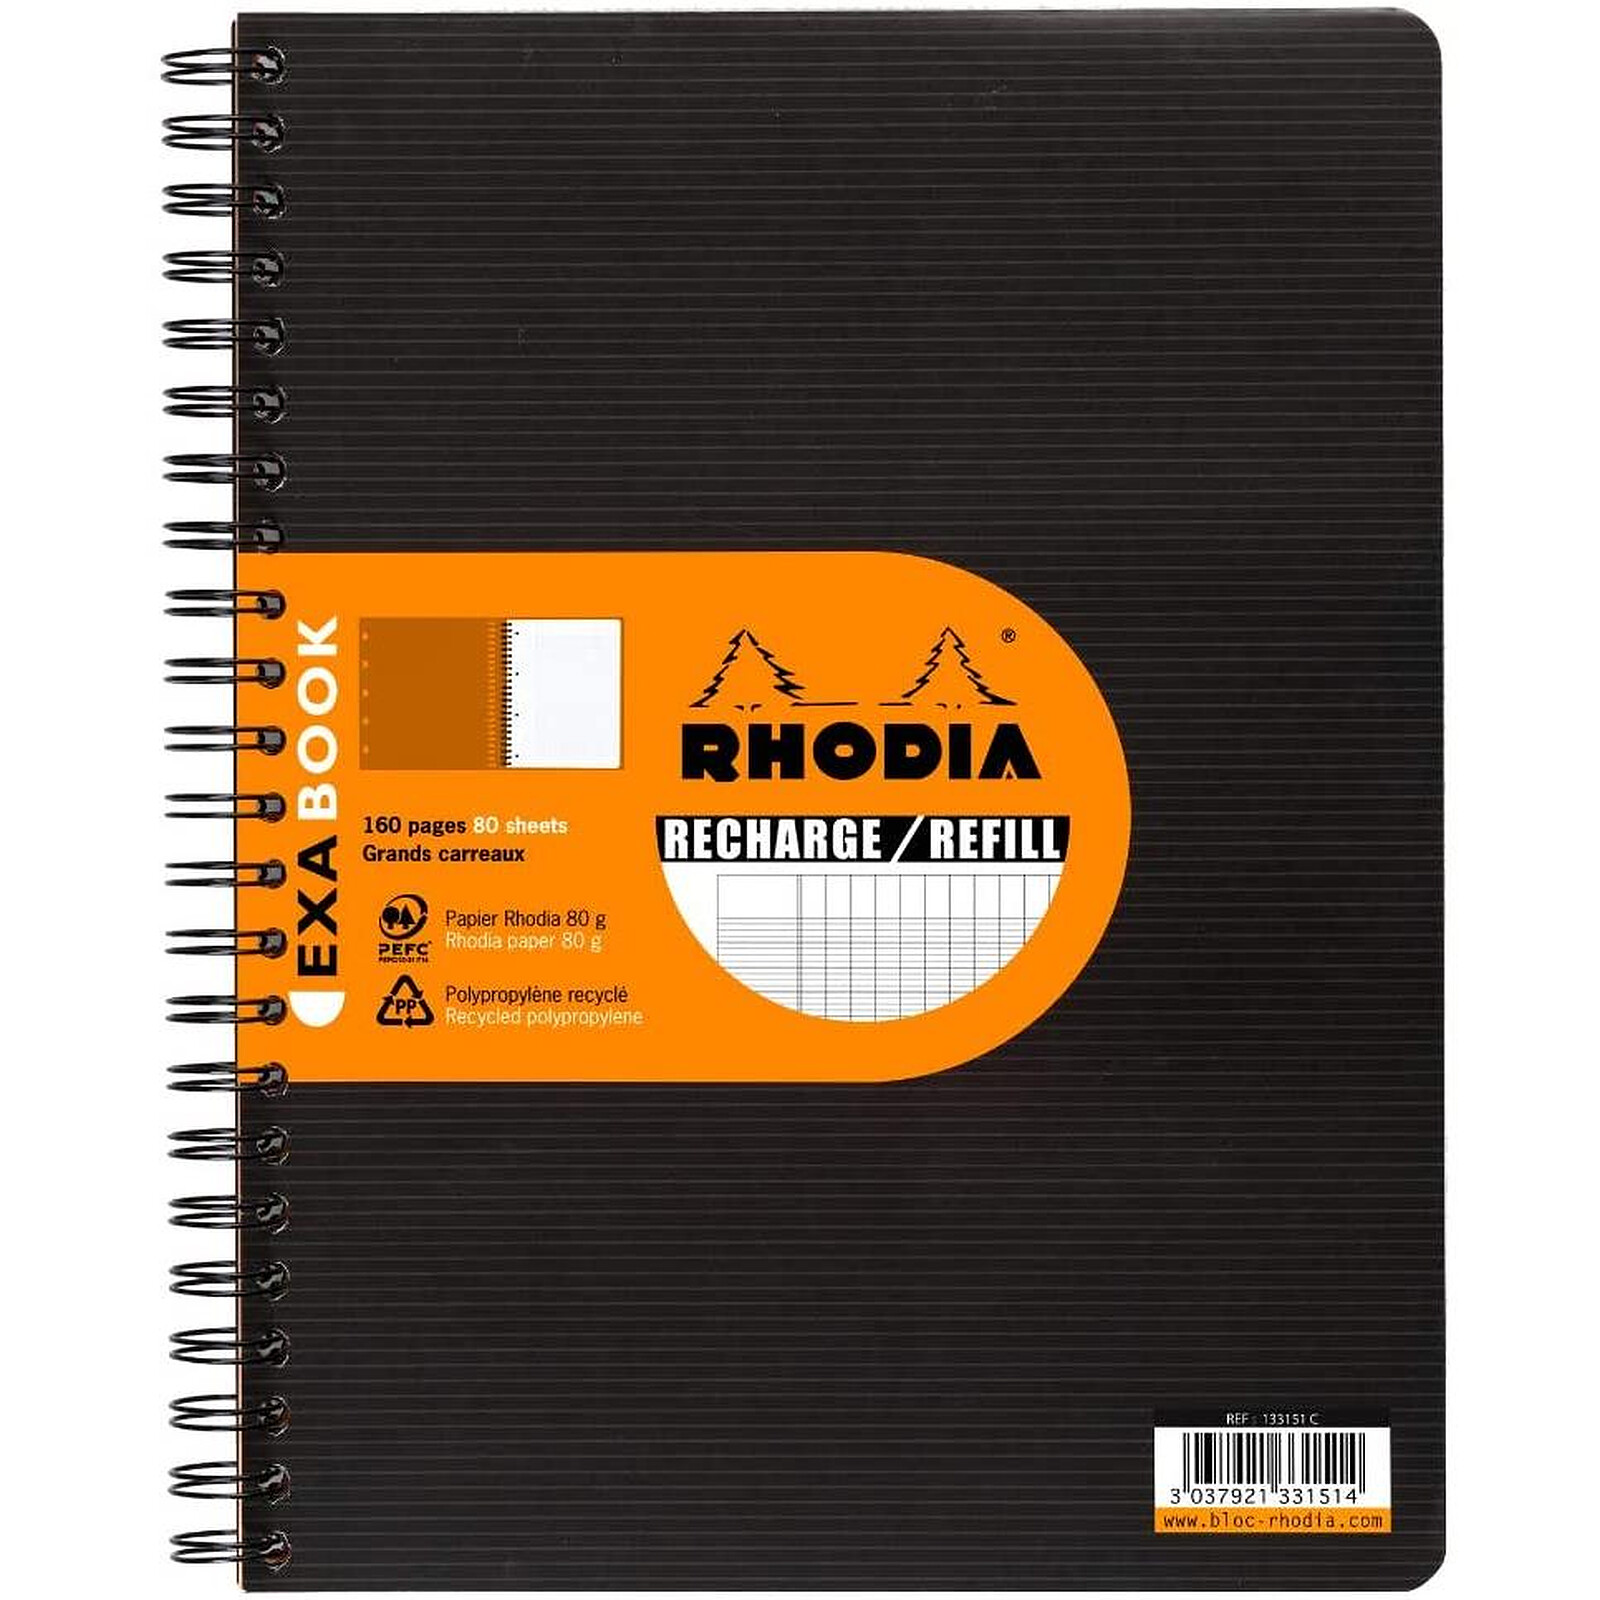 RHODIA Recharge Cahier Exabook RI A4+ 160 pages séyès - Bloc note